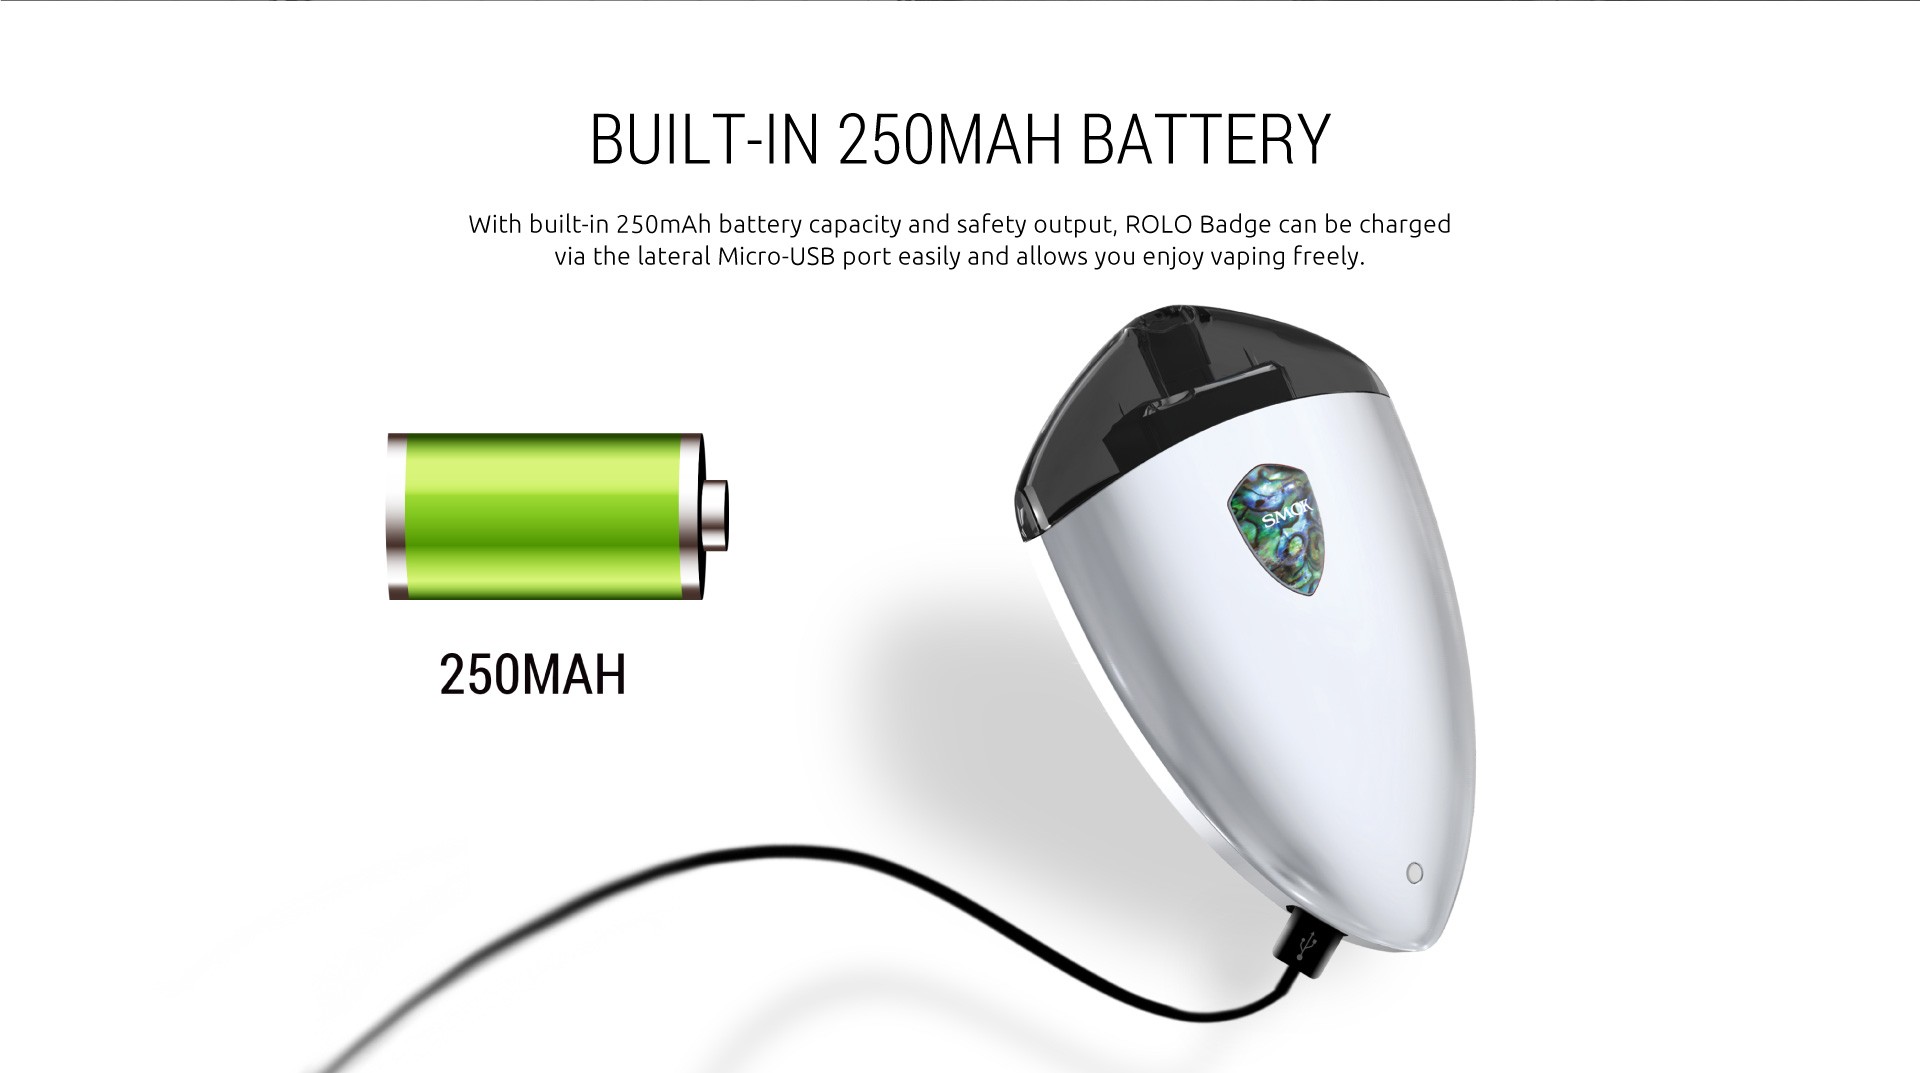 SMOK Rolo Badge built-in battery